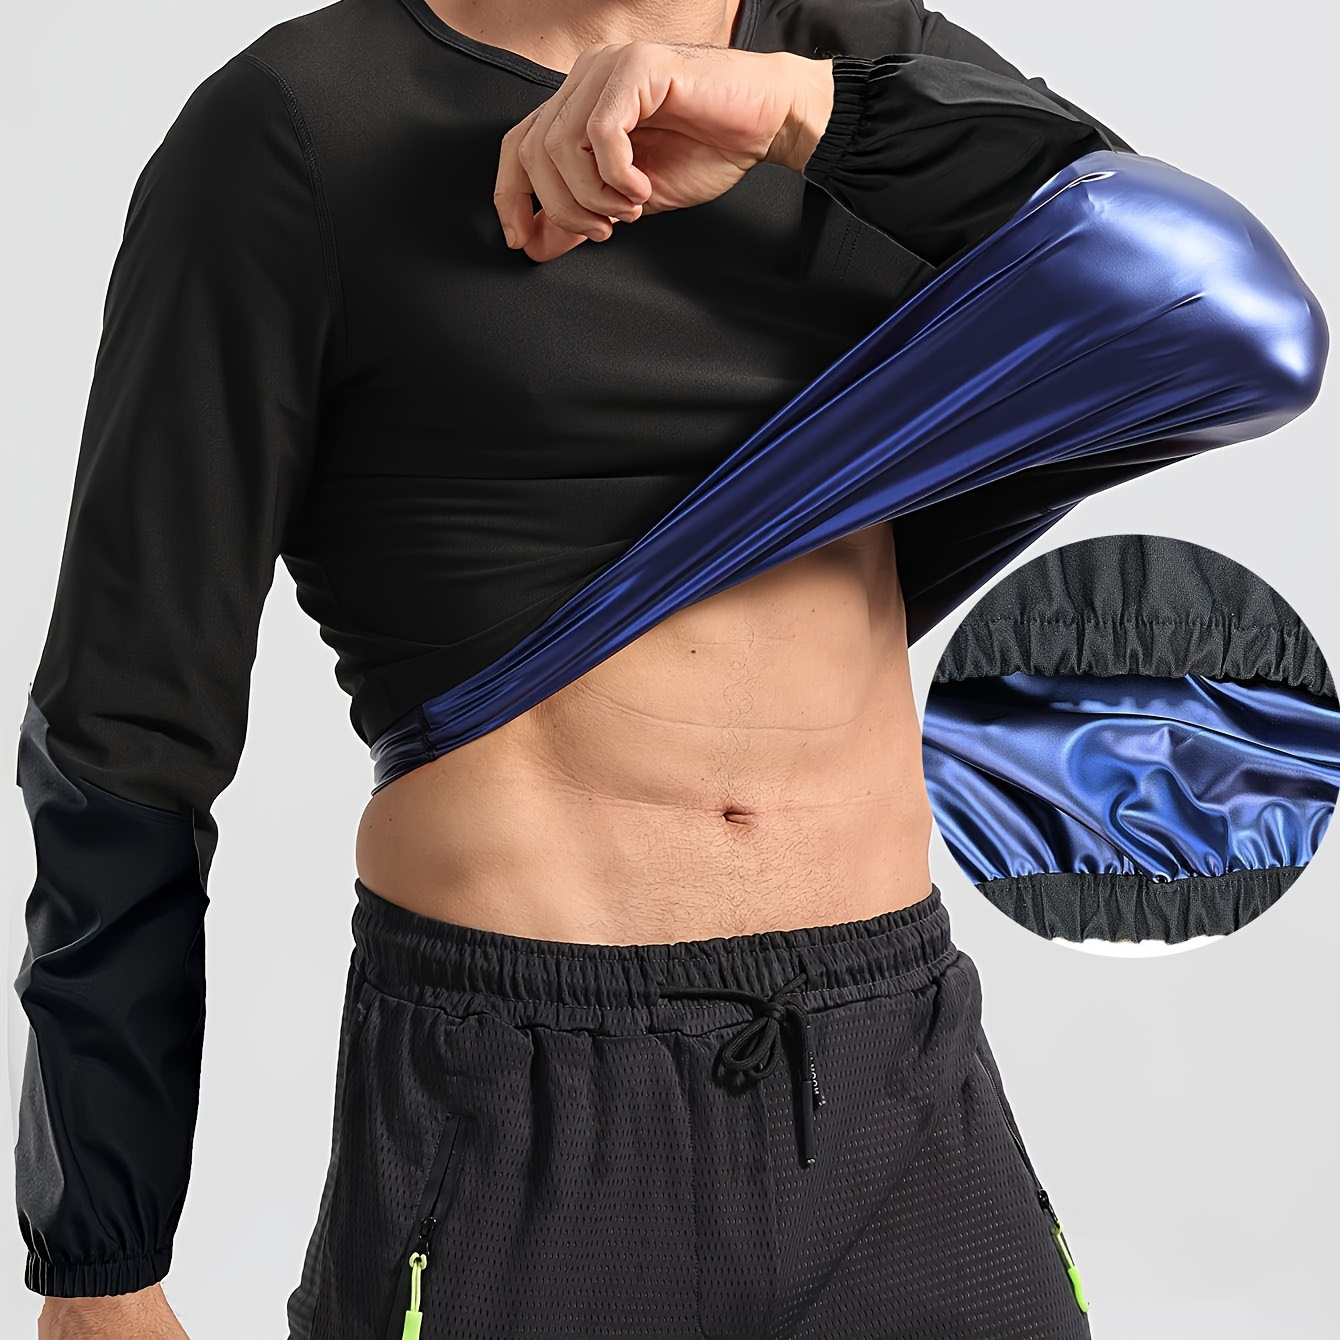 

Men's Compression Sweat Sauna Shirt: Get Fit & Feel Great With Back Support & Long Sleeves!